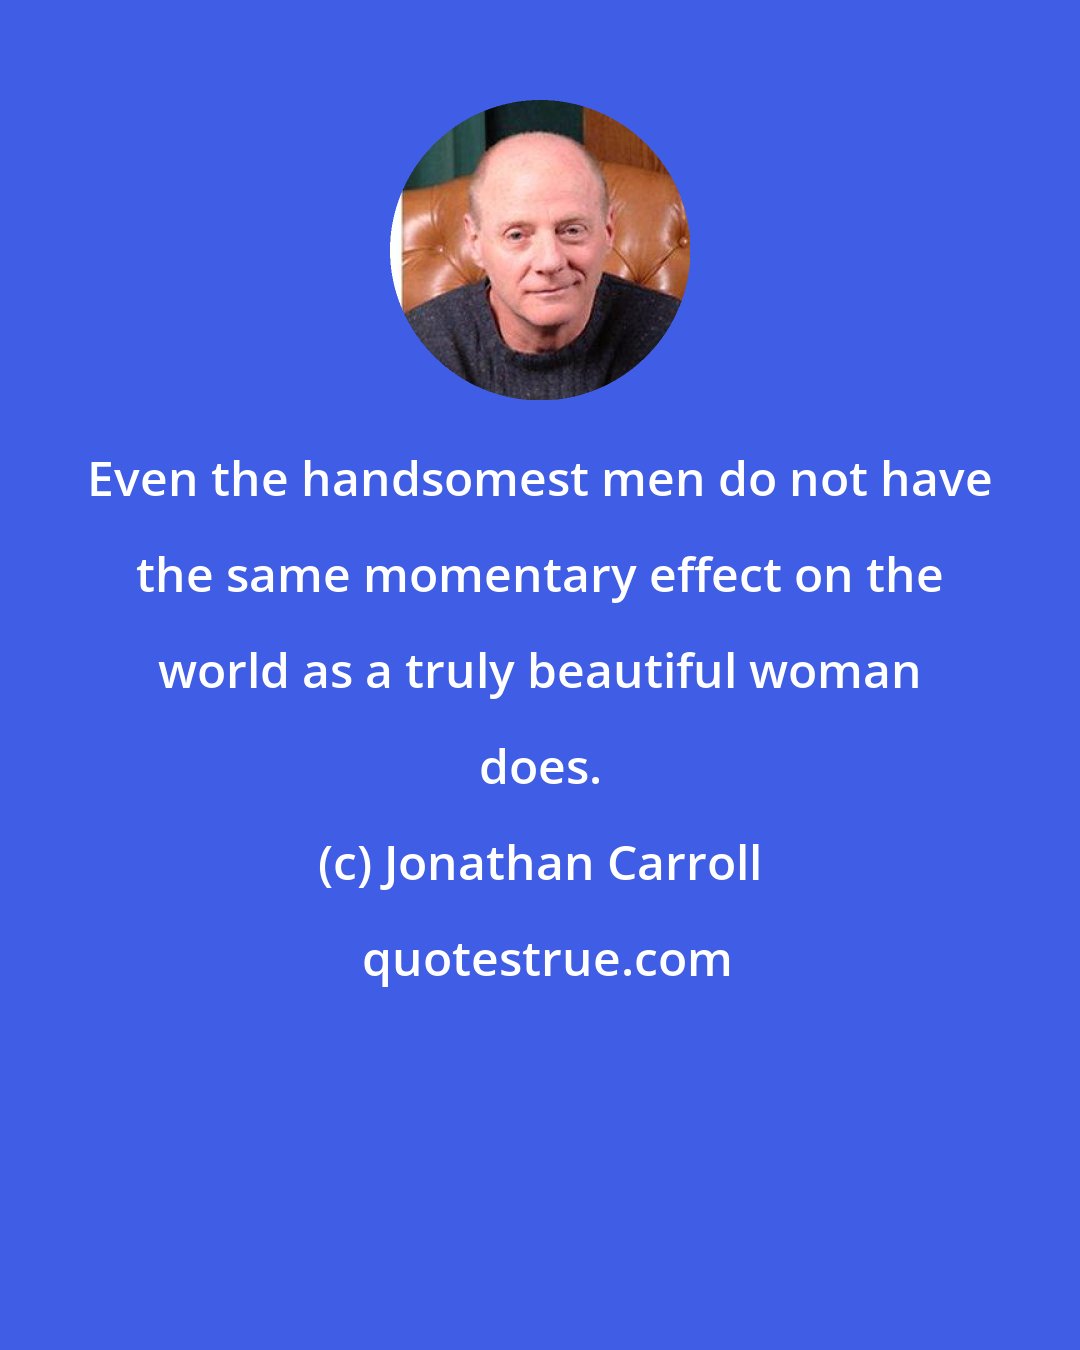 Jonathan Carroll: Even the handsomest men do not have the same momentary effect on the world as a truly beautiful woman does.